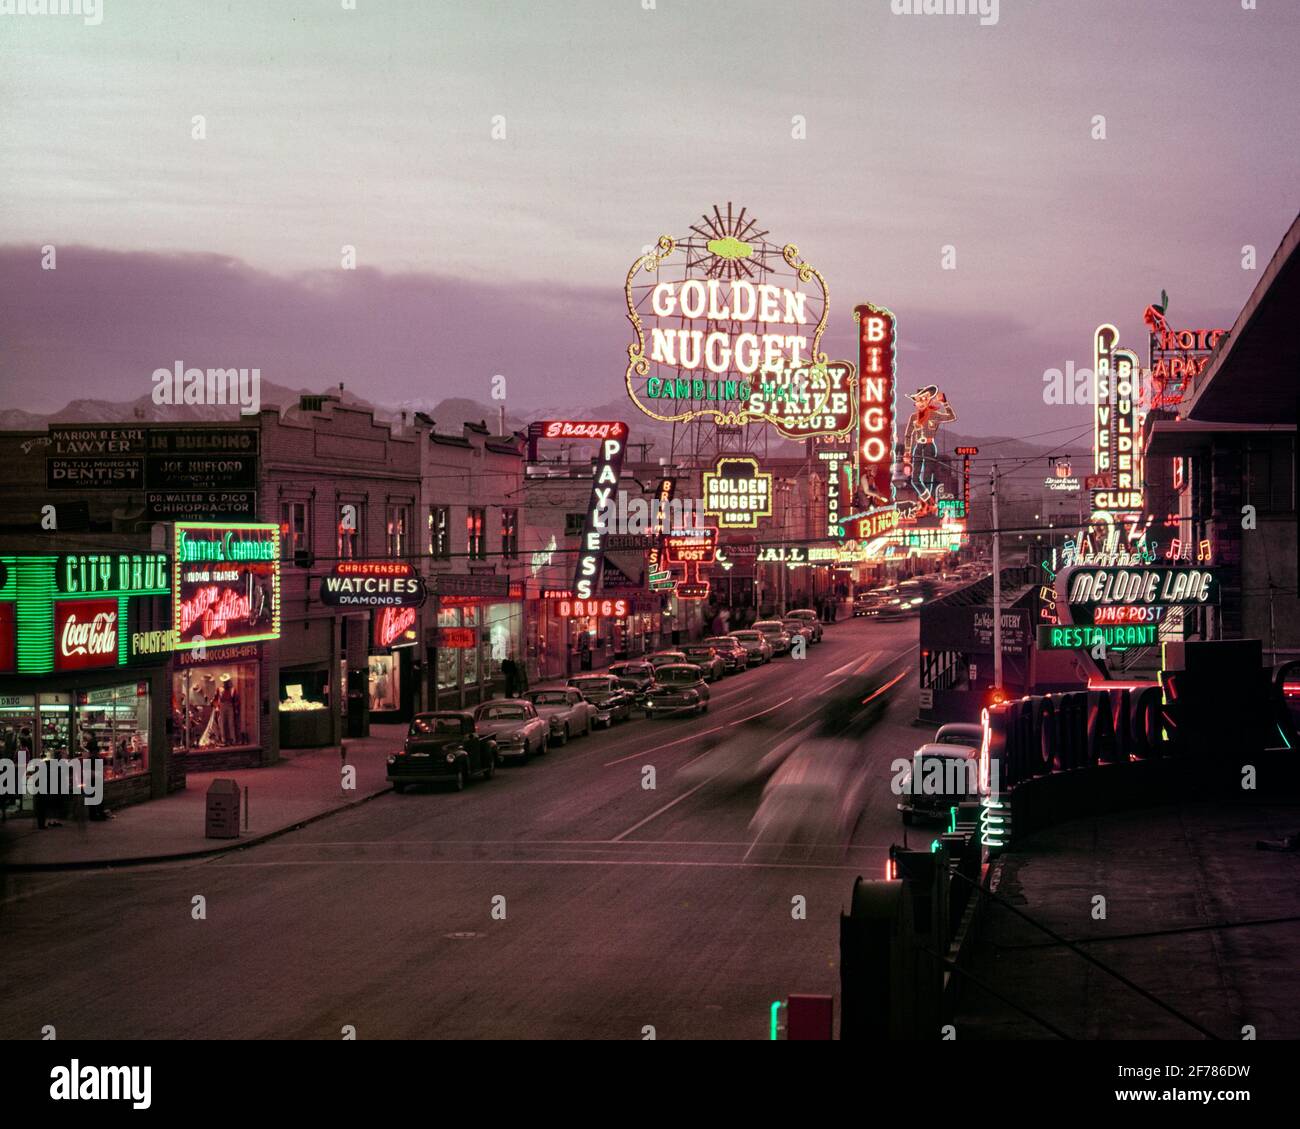 1940s GOLDEN NUGGET AND OTHER CASINOS HOTELS SHOPS NEON SIGNS ALONG STRIP FREMONT STREET AT TWILIGHT LAS VEGAS NEVADA USA - asp 1279 025 ASP001 HARS SOUTHWEST STRIP FREMONT STREET BINGO HOTELS LAS VEGAS TWILIGHT CASINOS OLD FASHIONED SOUTHWESTERN Stock Photo